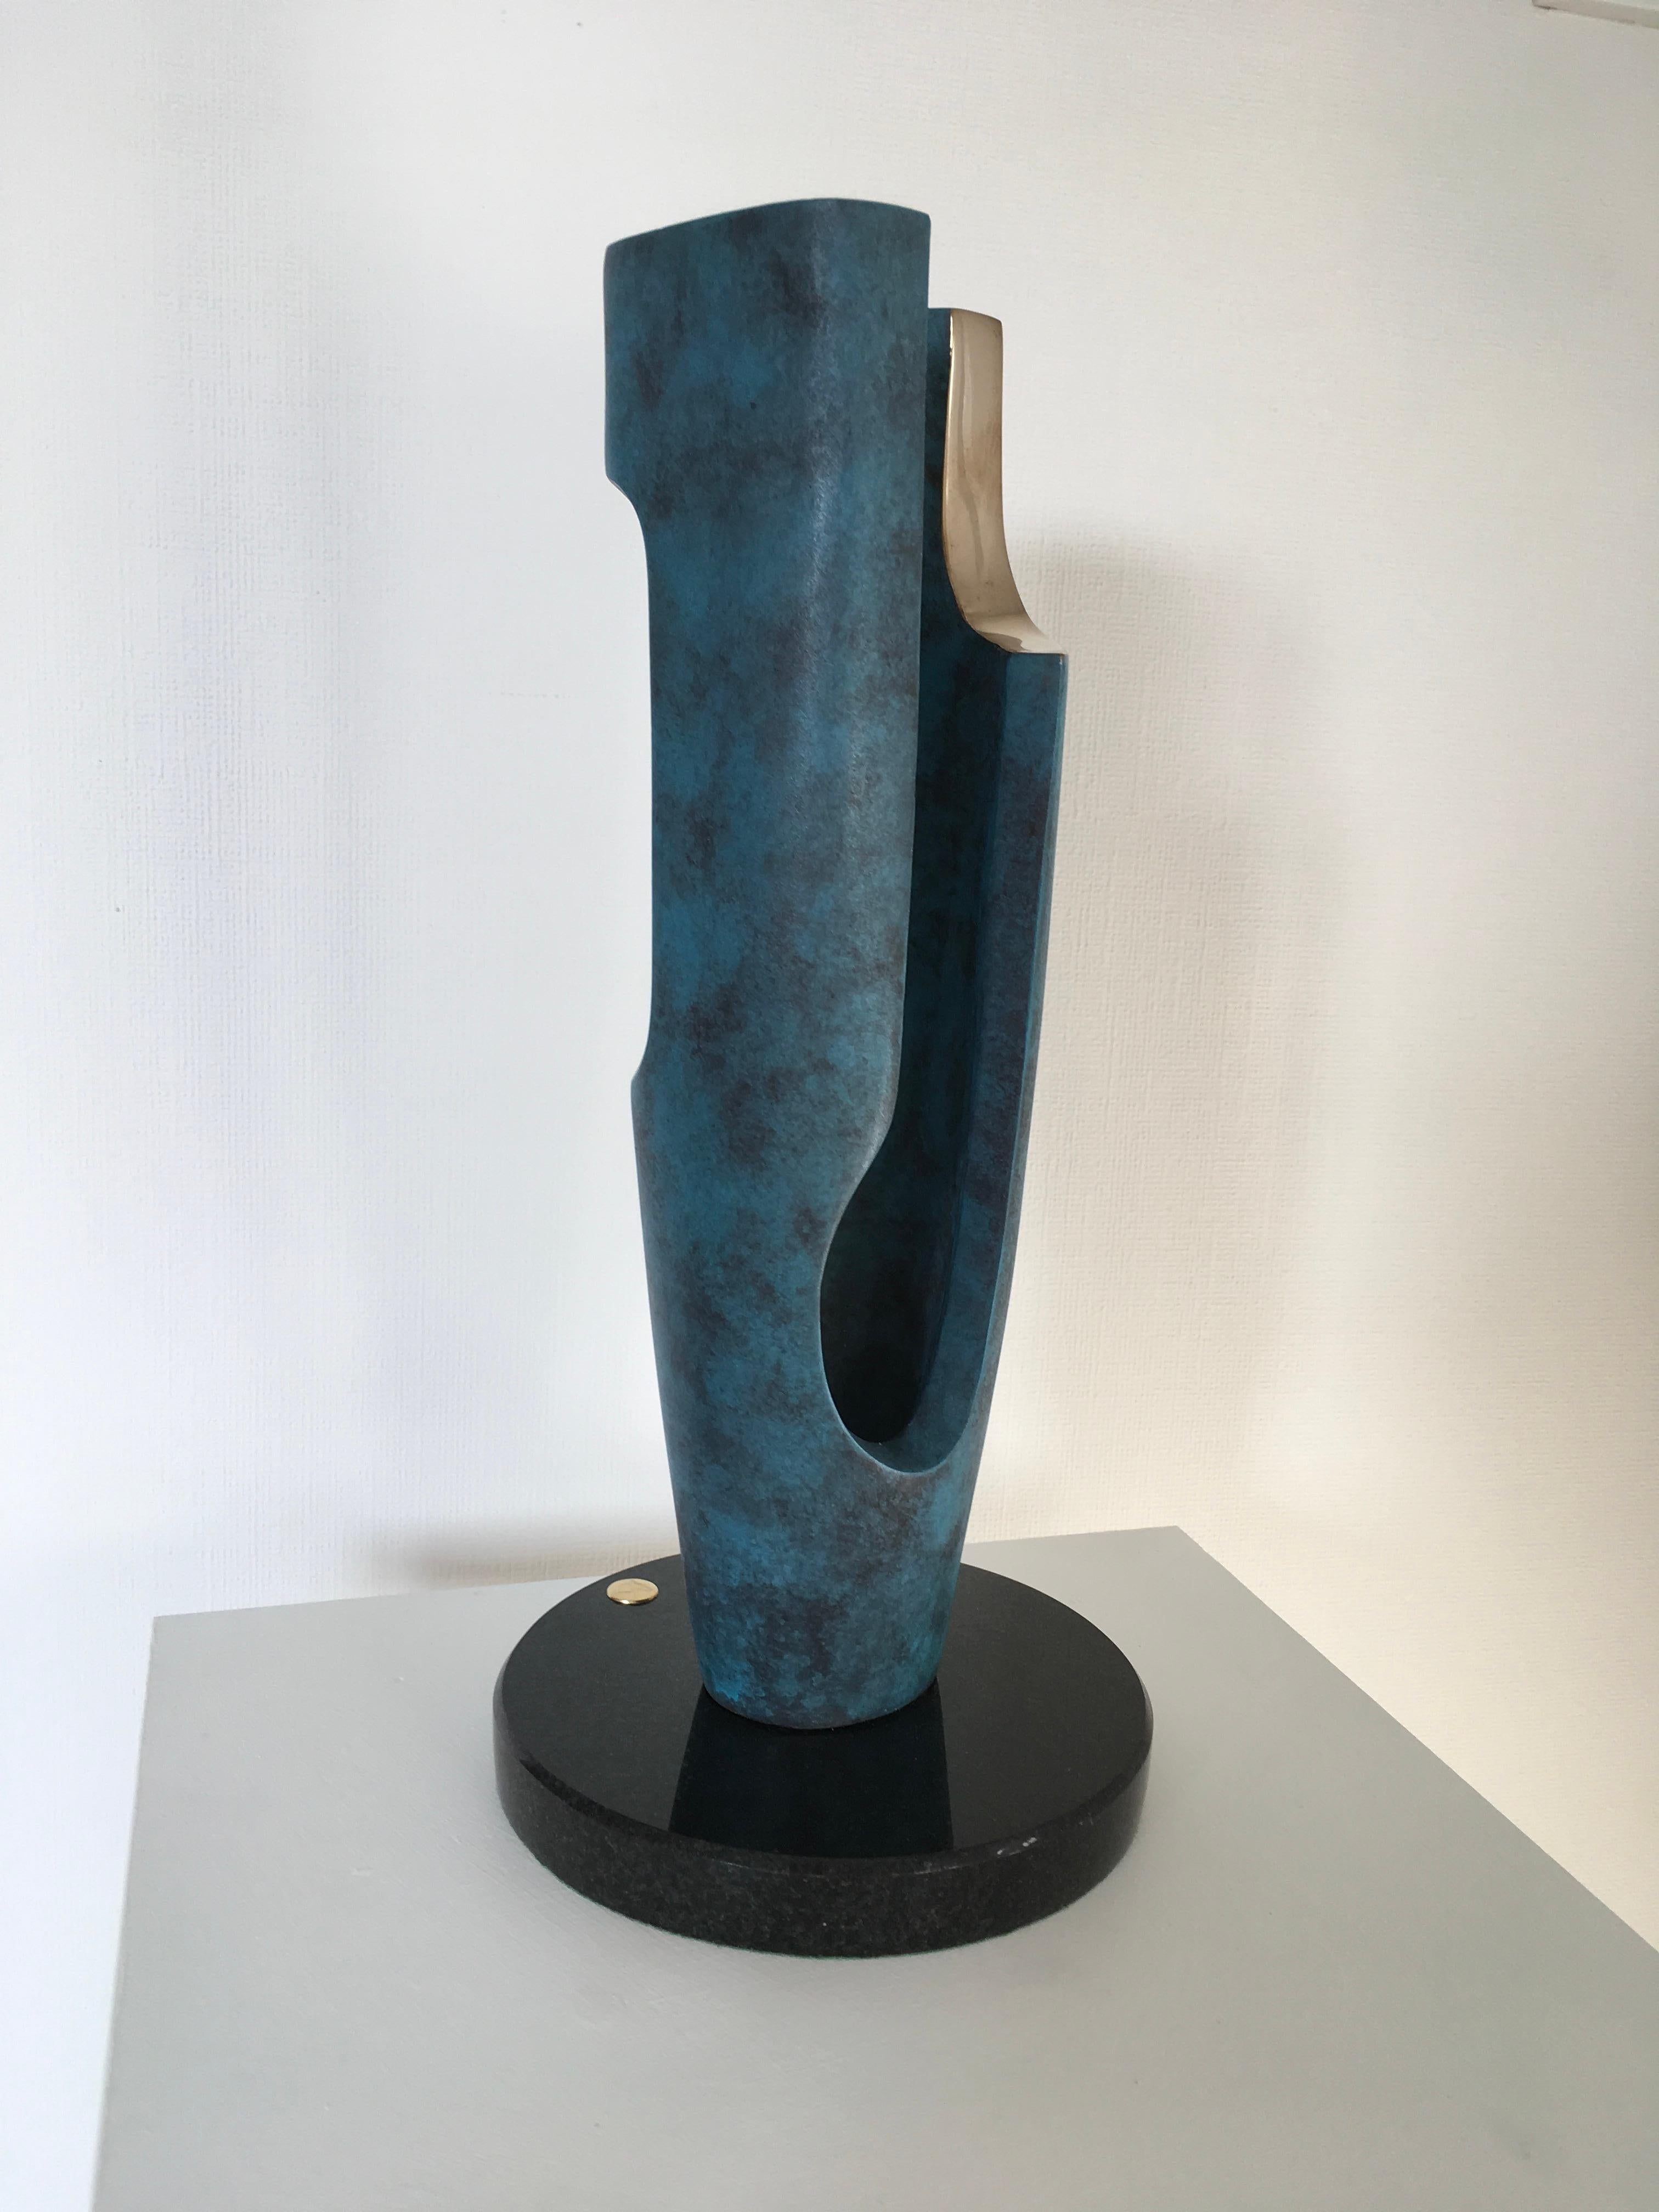 This modern and distinctive artwork by contemporary artist and sculptor David Sprakes pushes the boundaries of modern sculpture. Sprakes uses materiality and design to create unique and original artistic forms that come to life in their three